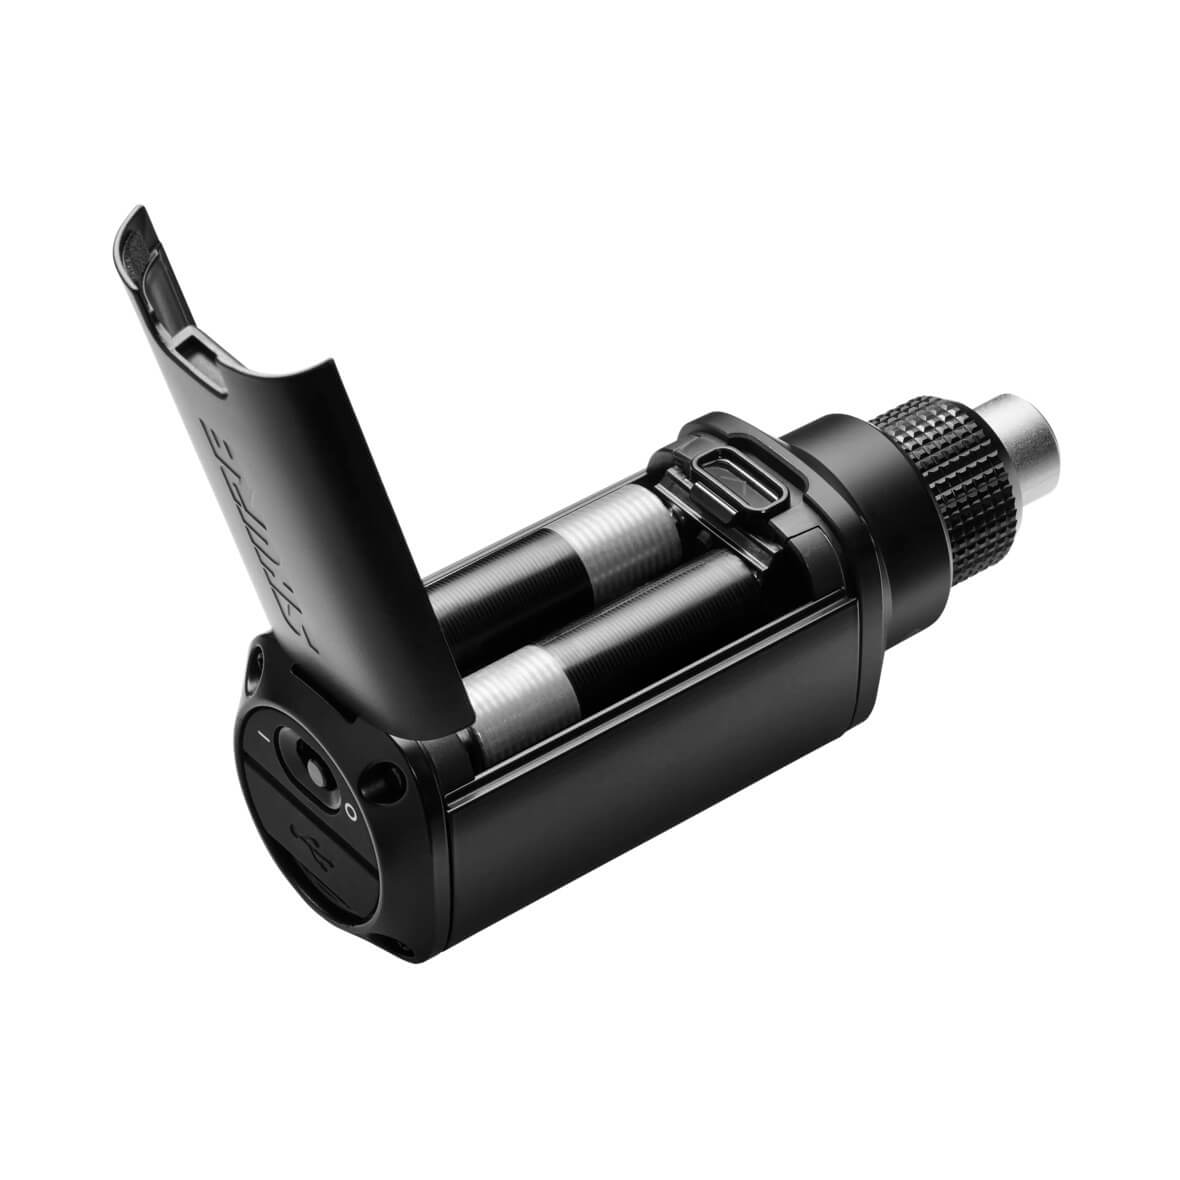 Shure SLXD3 plug-on wireless transmitter, shown with AA batteries